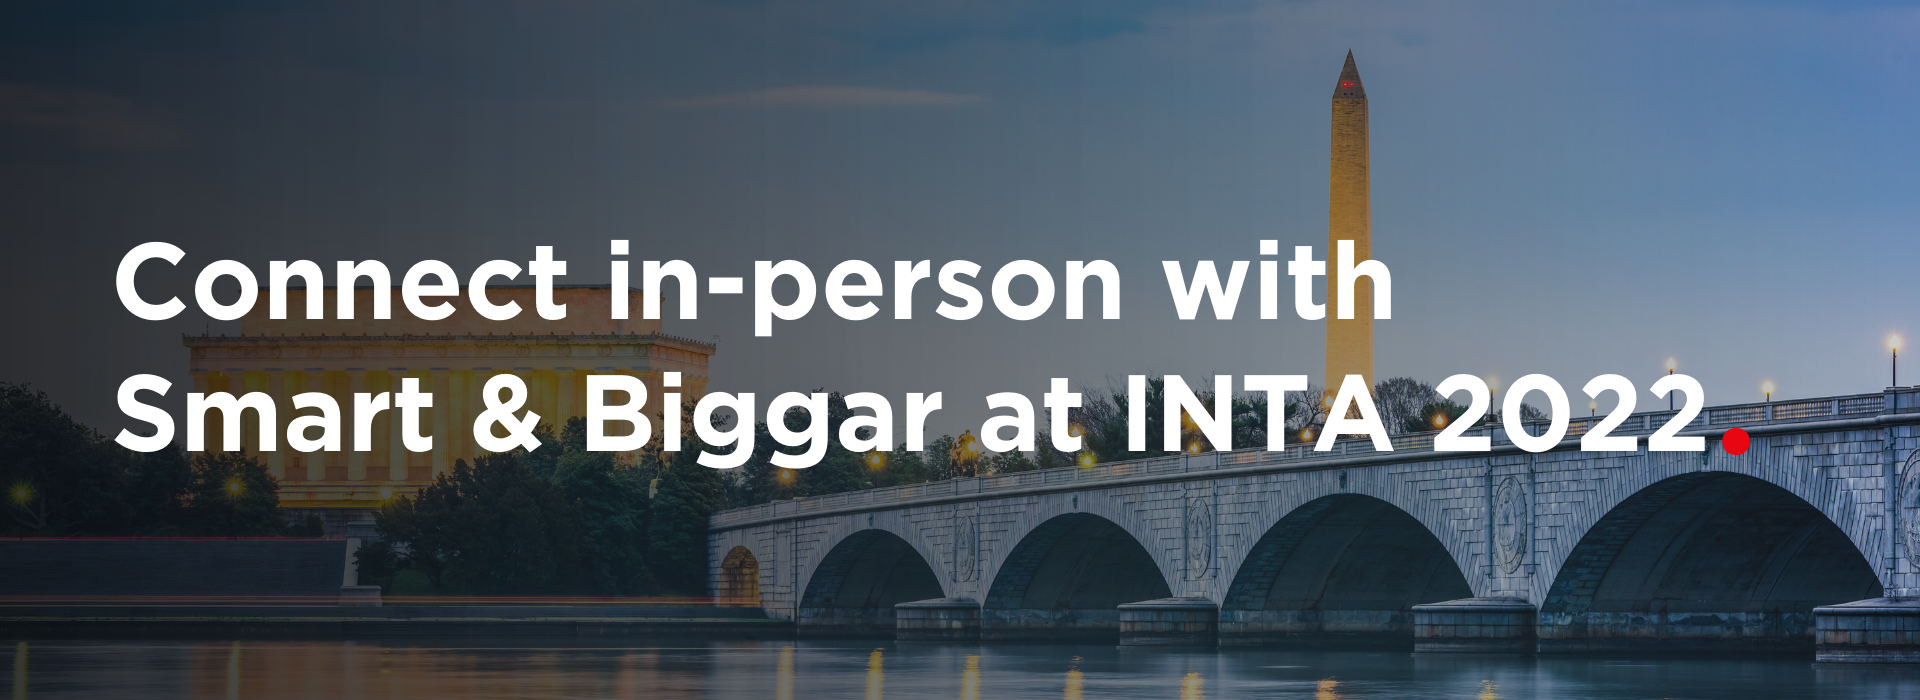 Connect in-person with Smart & Biggar at INTA 2022